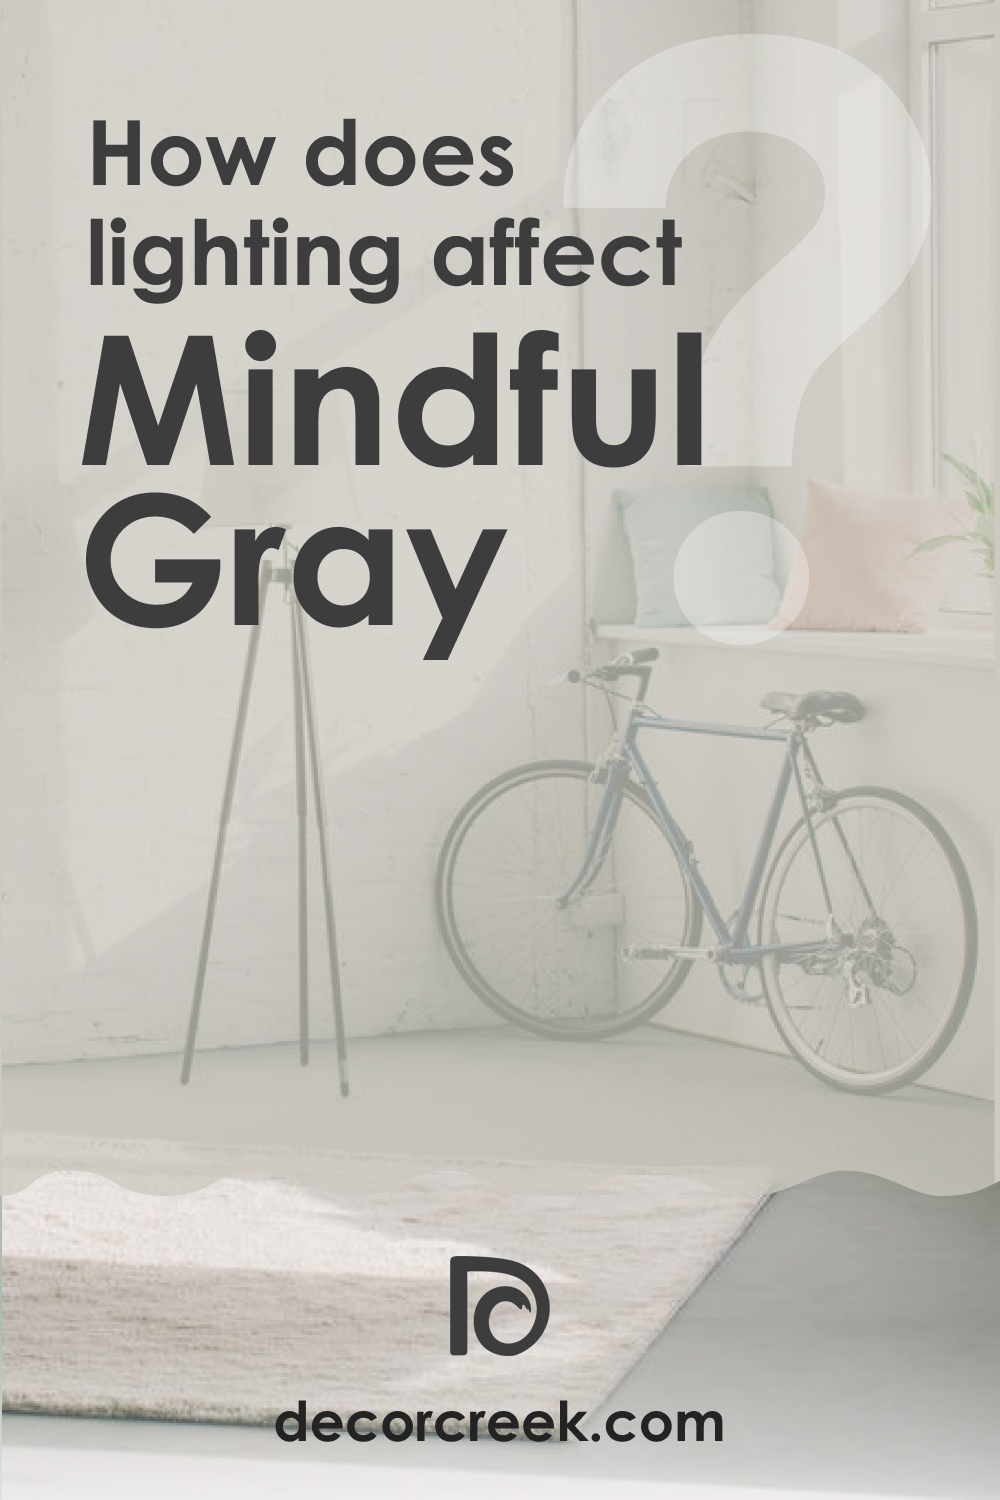 How Does Lighting Affect SW 7016 Mindful Gray?